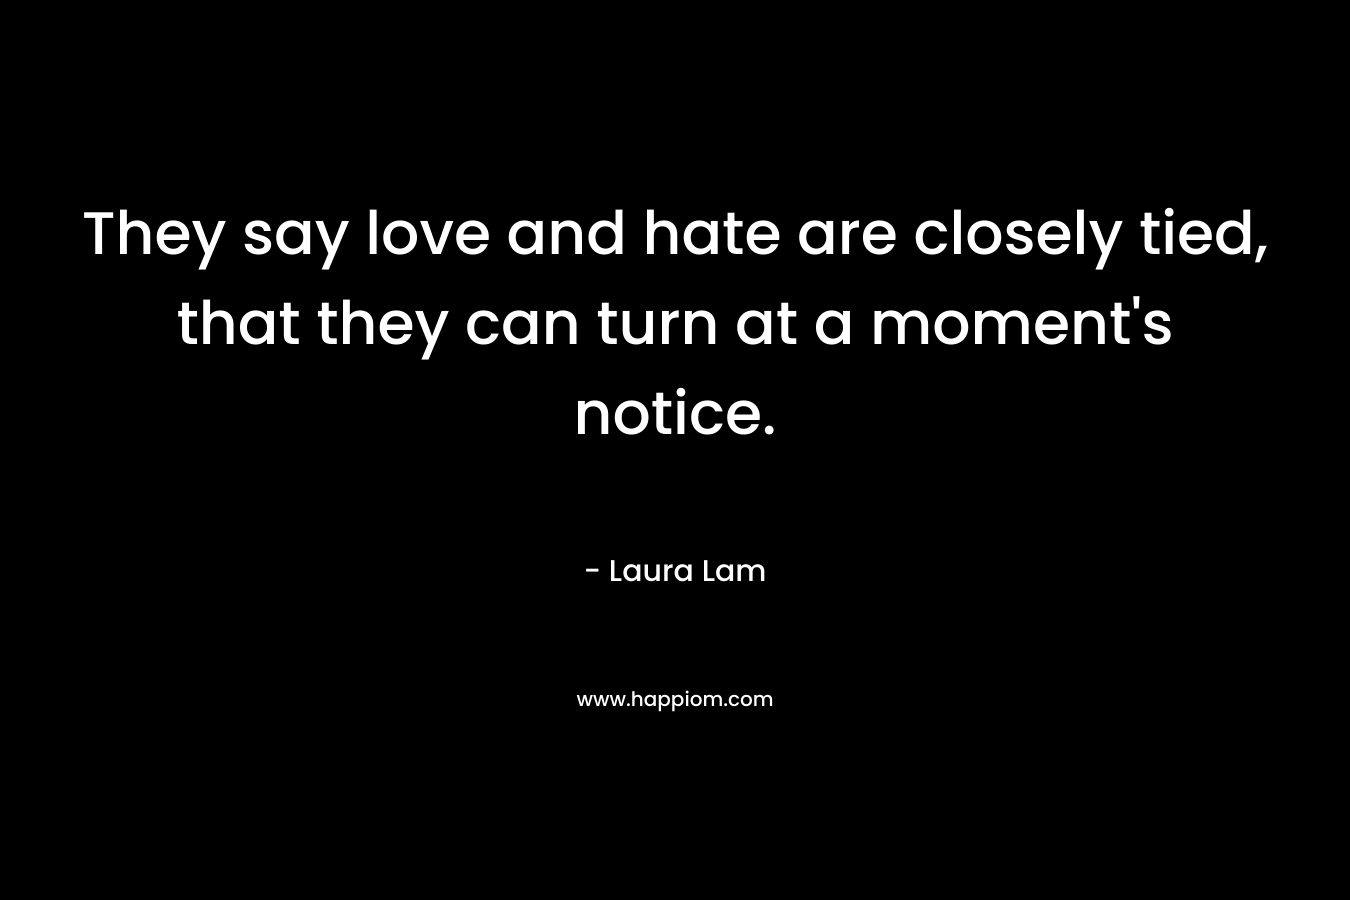 They say love and hate are closely tied, that they can turn at a moment’s notice. – Laura Lam